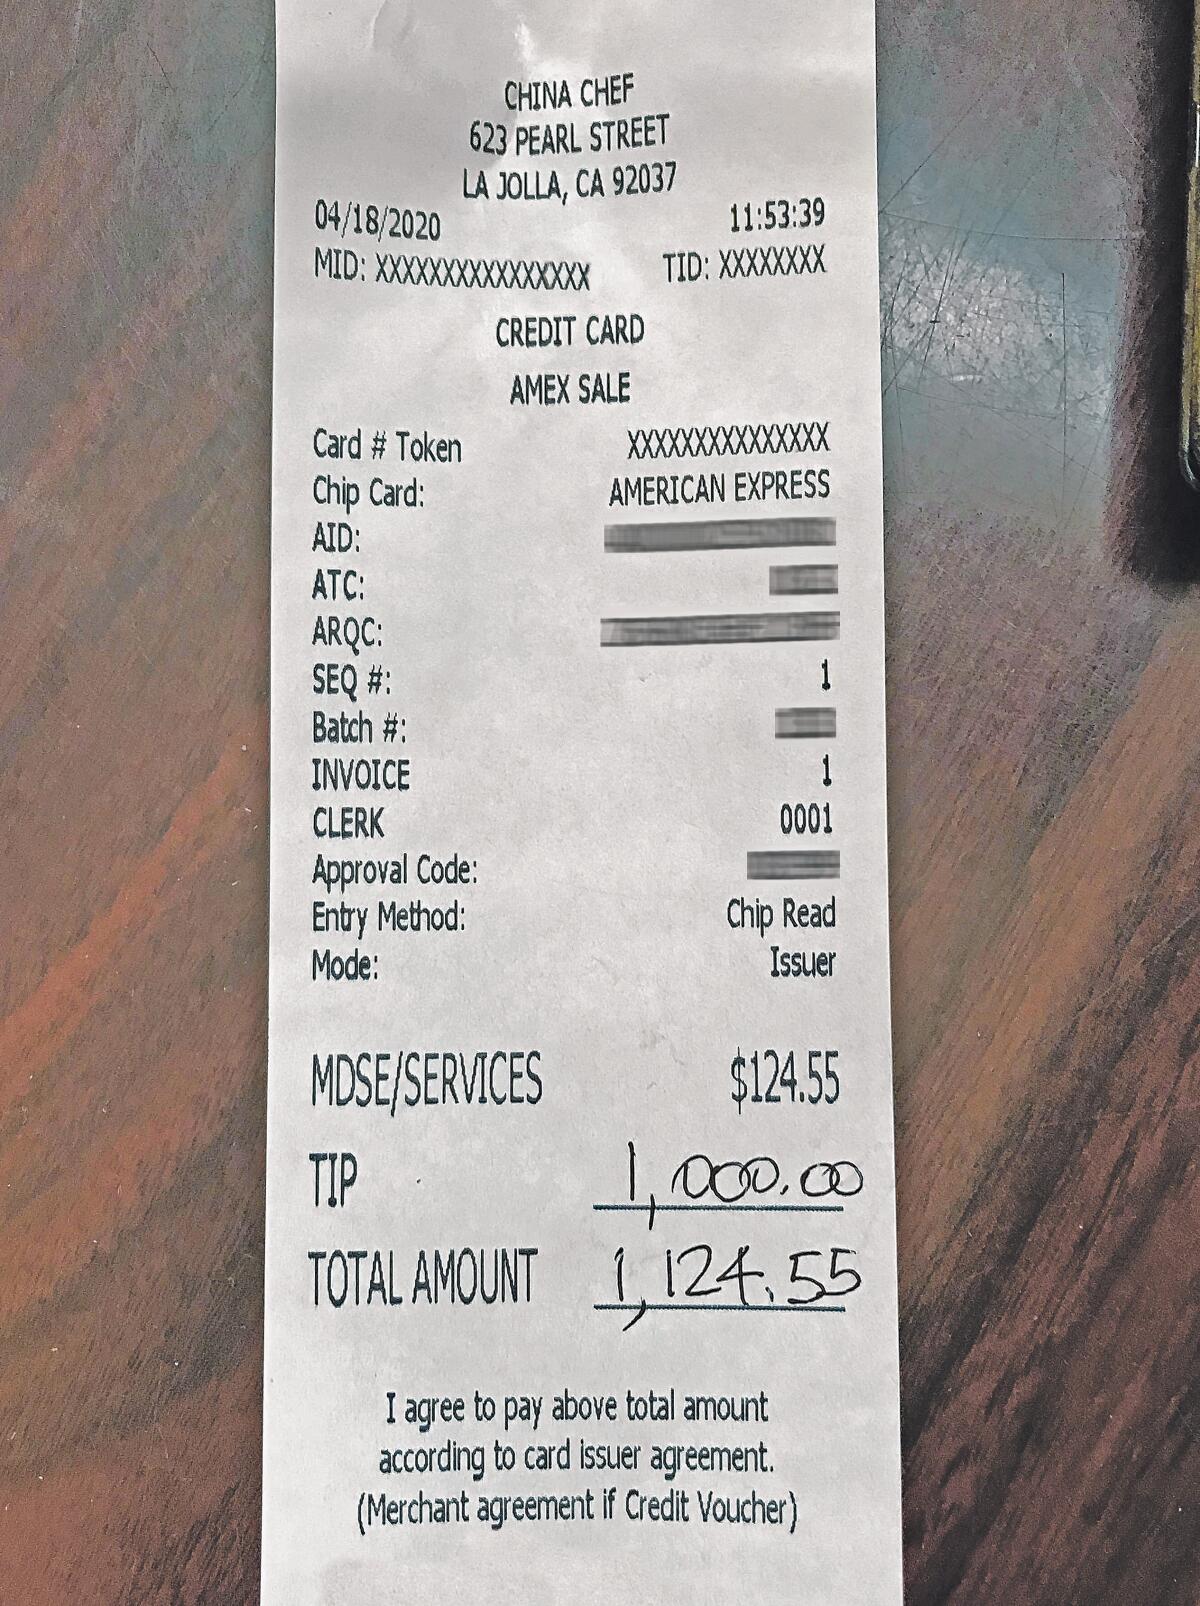 China Chef owner Bob Gu received a very generous tip on a takeout meal he prepared: $1,000.